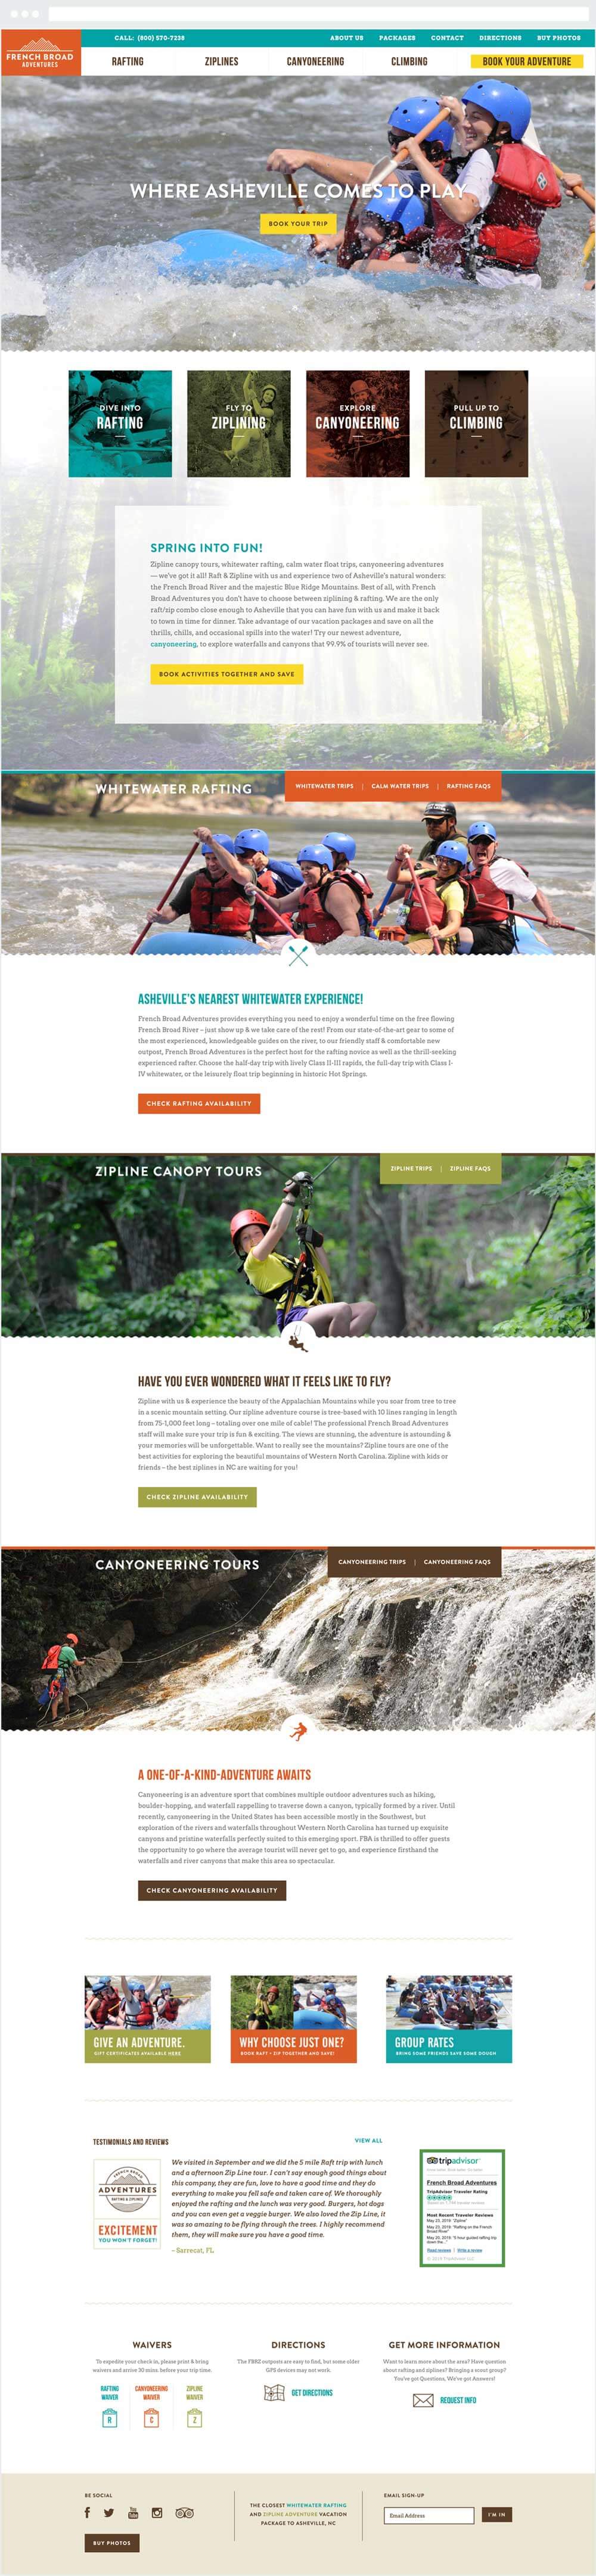 French Broad Adventures Homepage Redesign